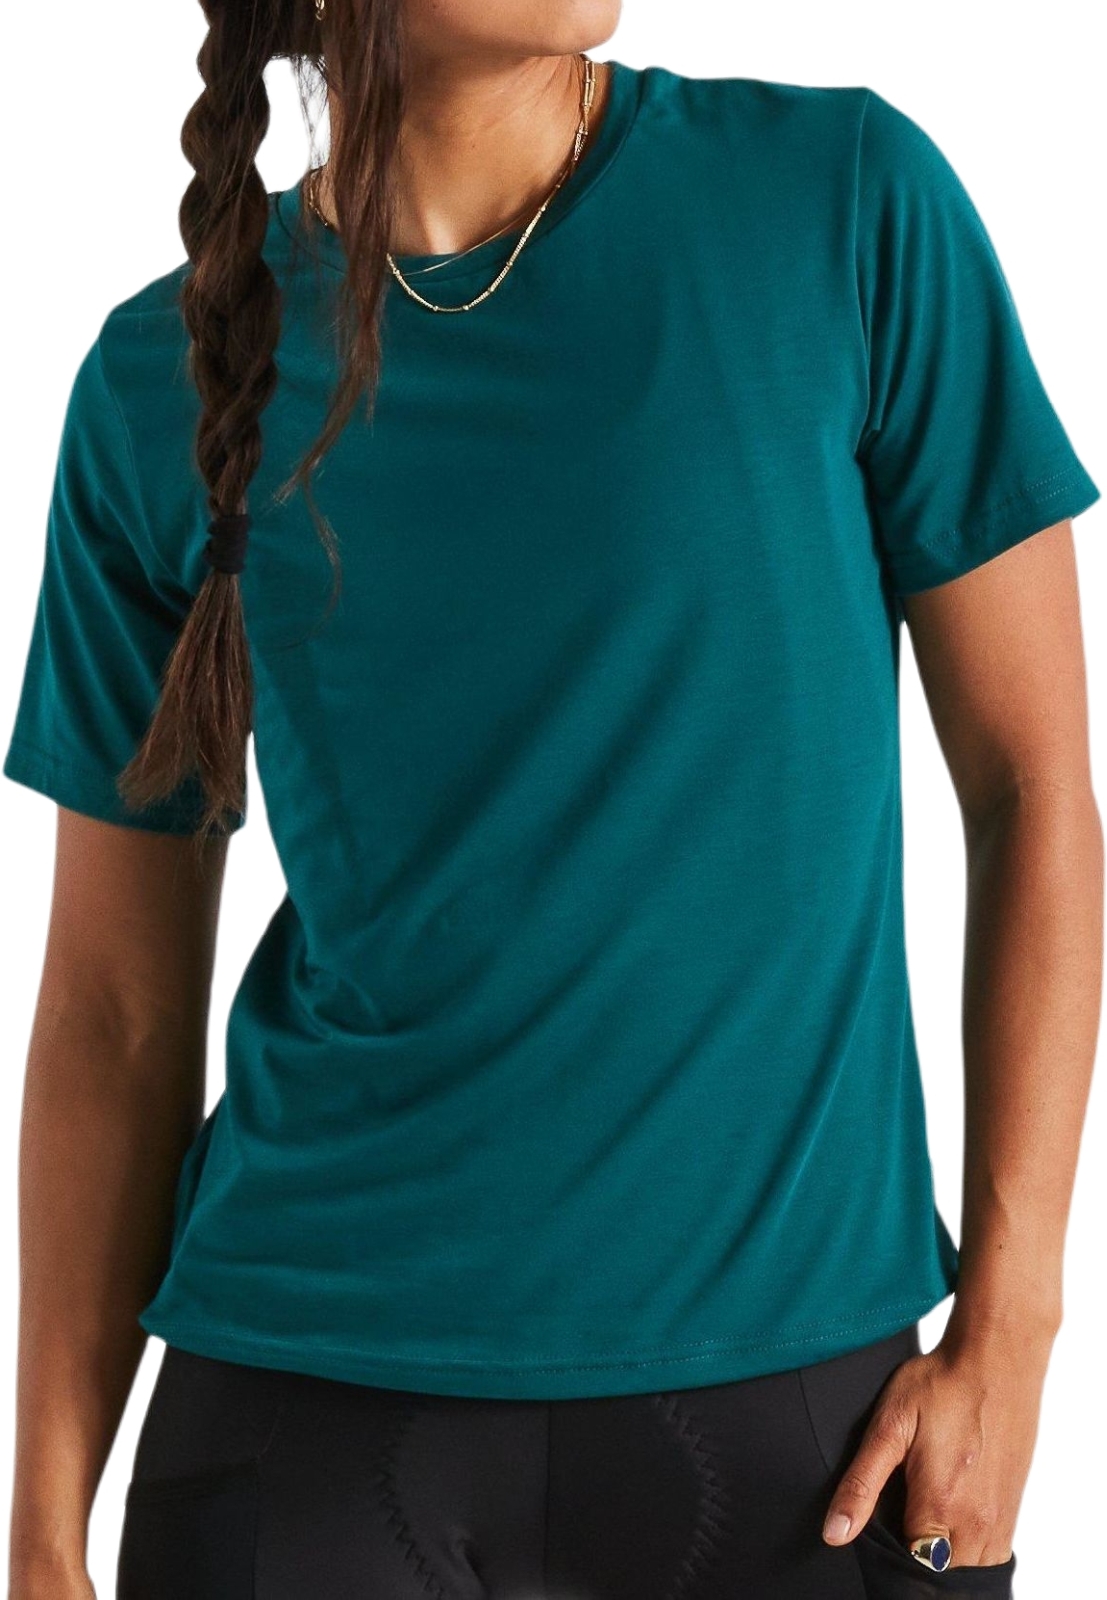 E-shop Specialized Women's Adv Air Jersey SS - tropical teal S